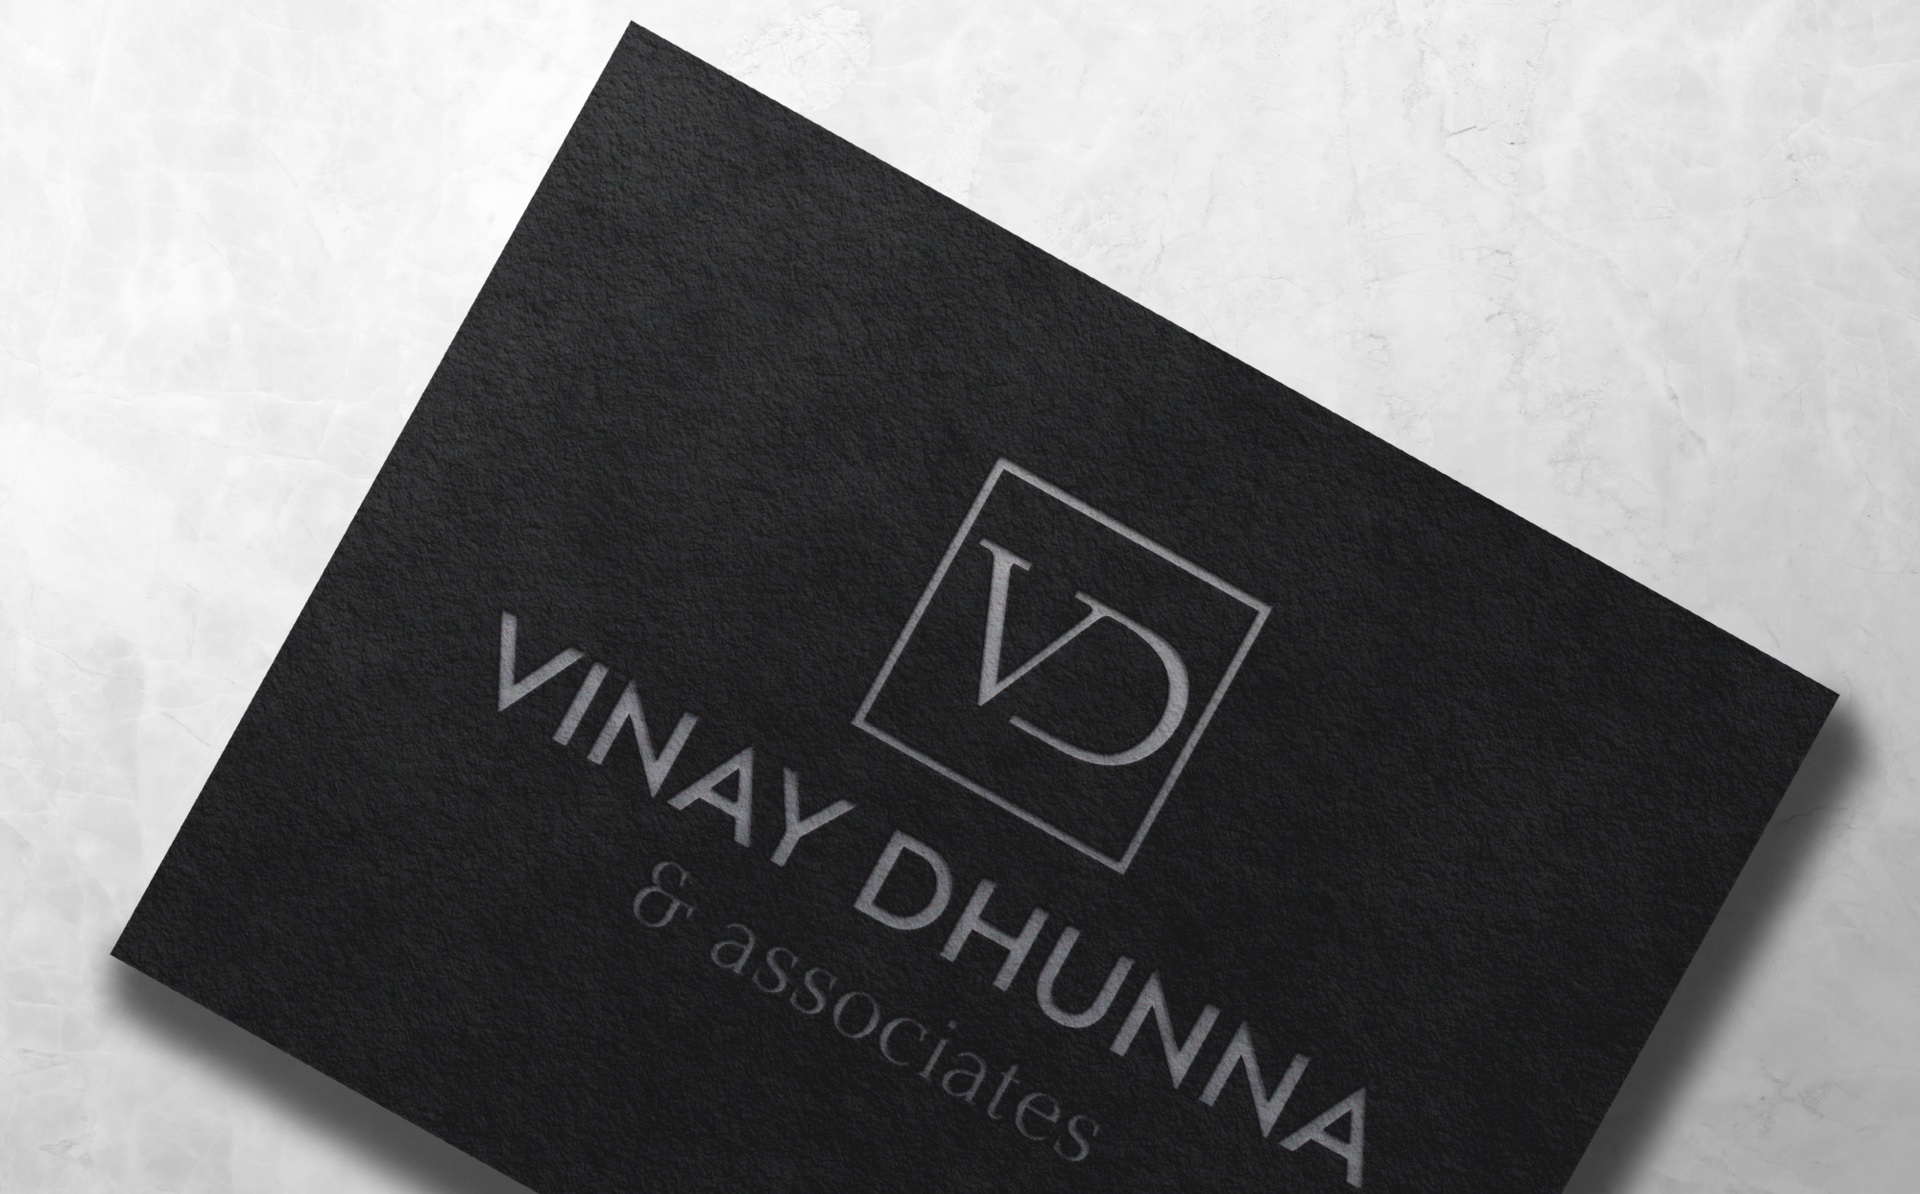 Custom business card created exclusively for Realtor Vinay Dhunna